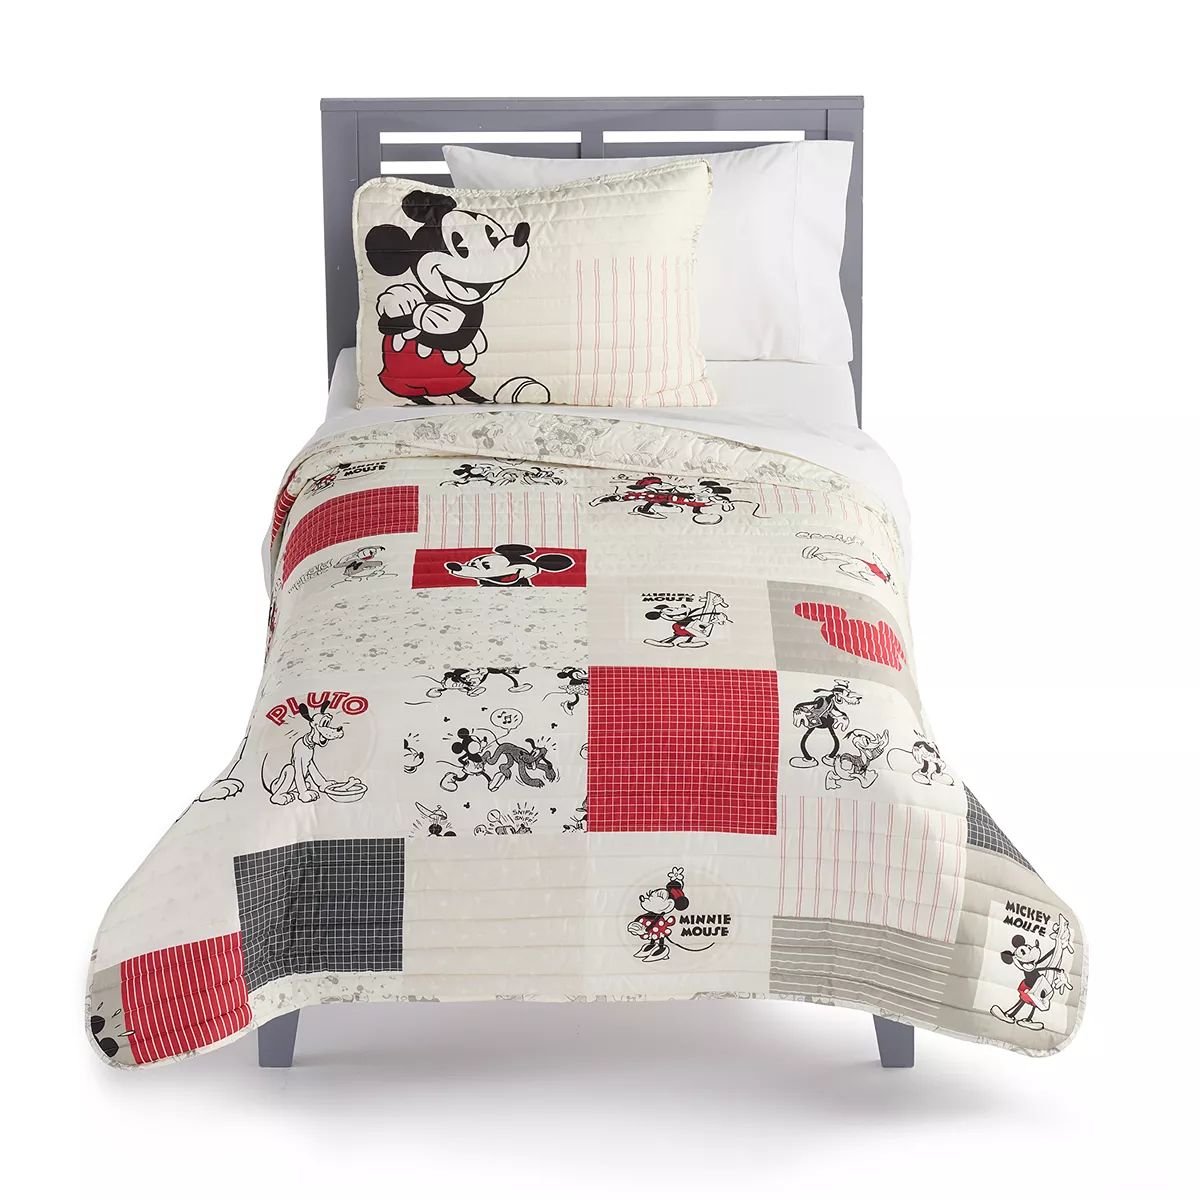 Disney's Mickey Mouse Quilt Set with Shams by The Big One® | Kohl's